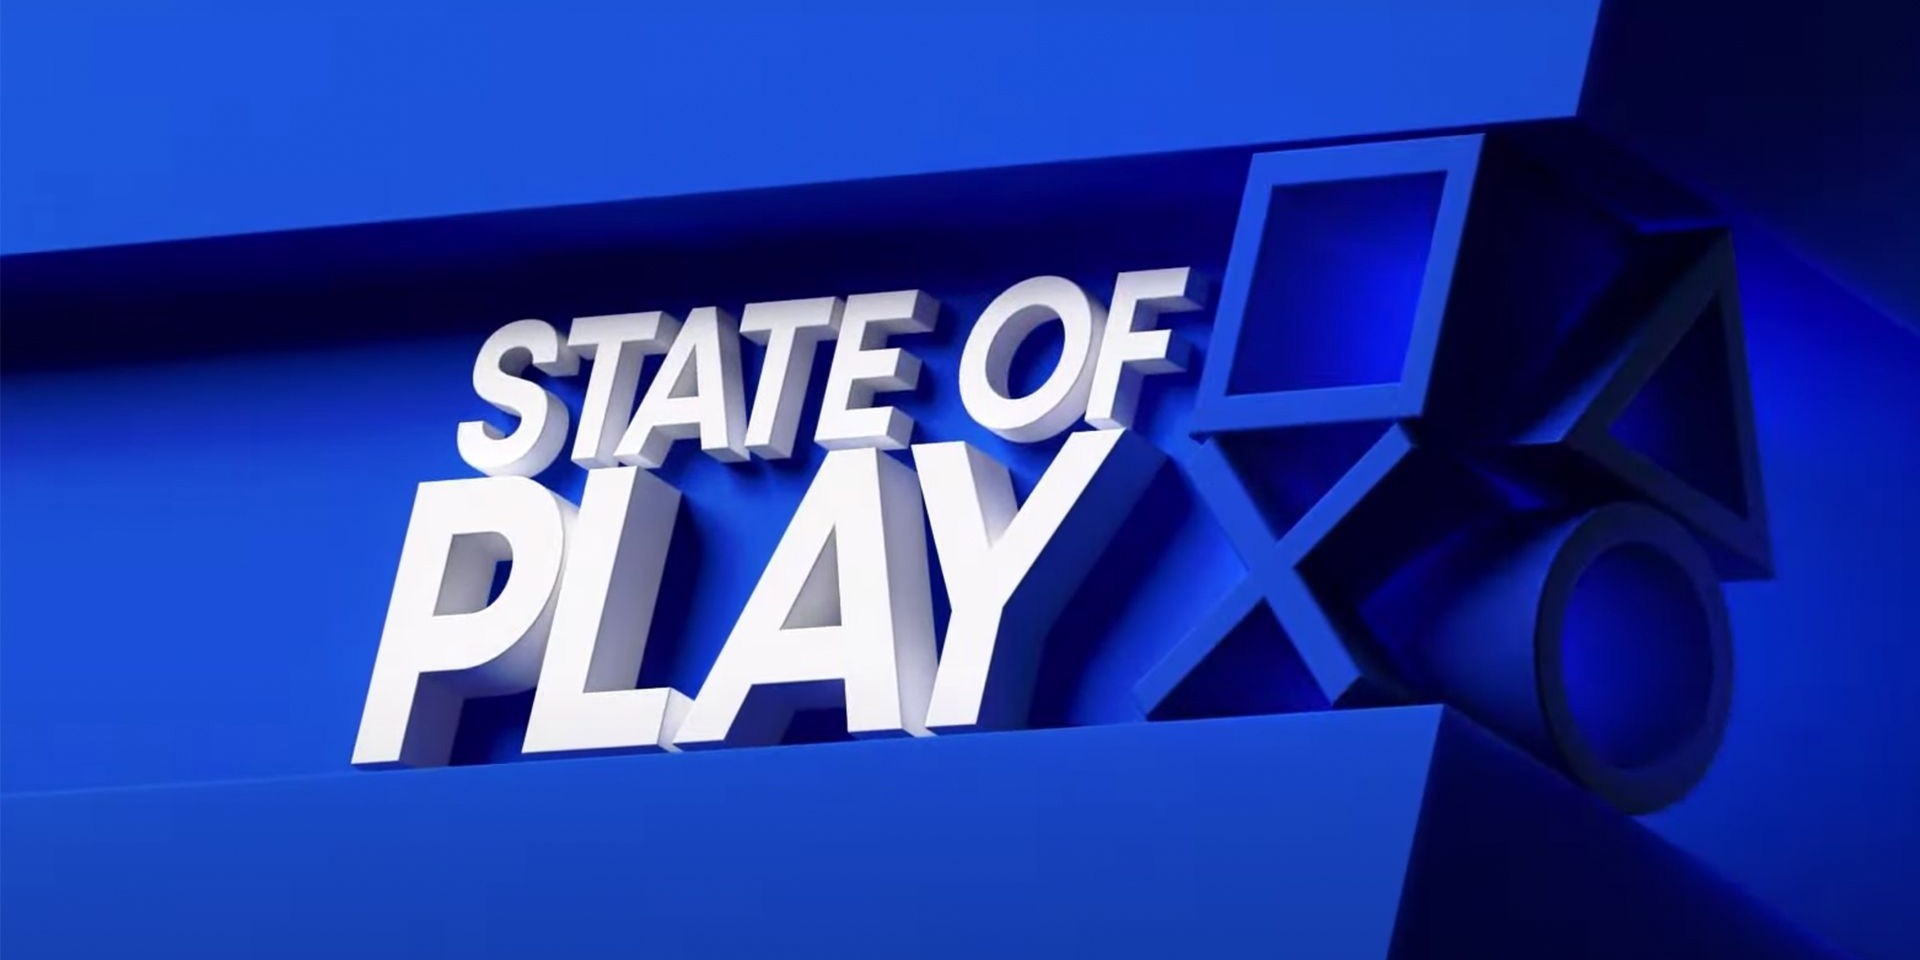 PlayStation announces State of Play showcase this week